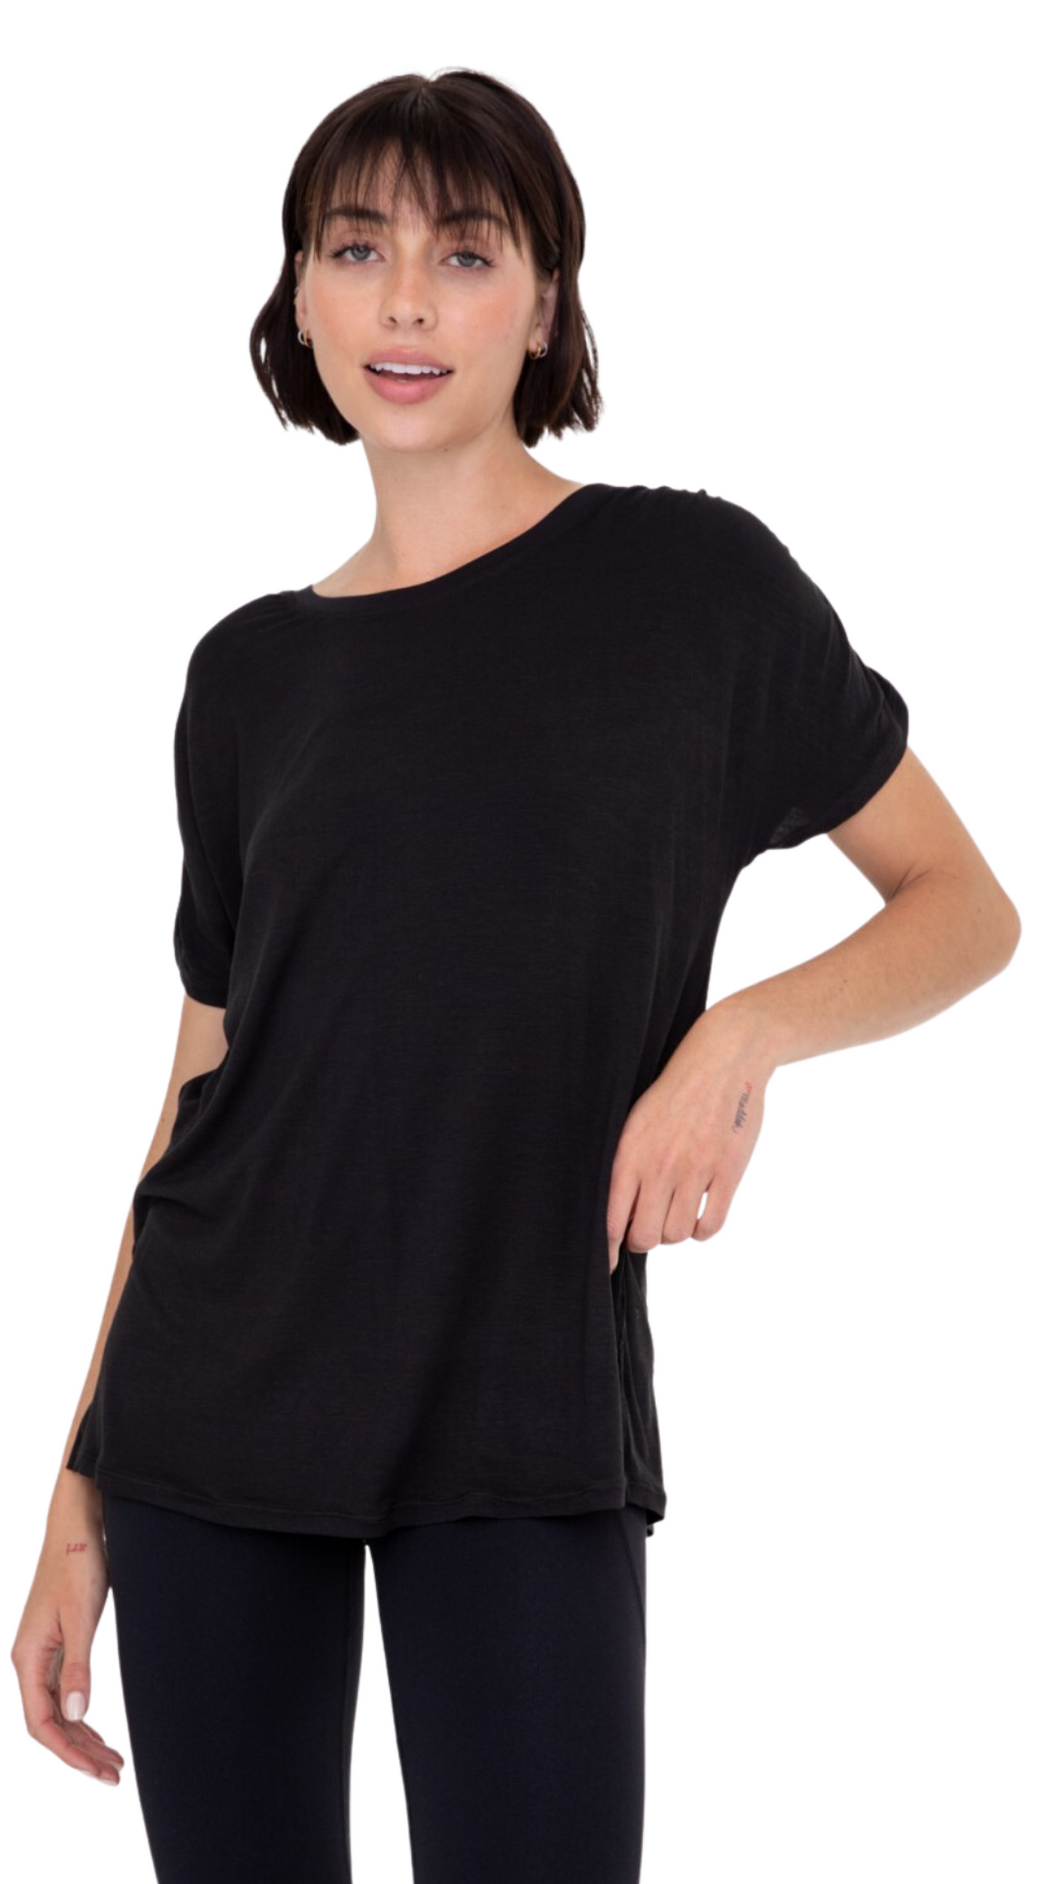 FREE MB SOFT TOUCH SHORT SLEEVES TANK TOP BLACK